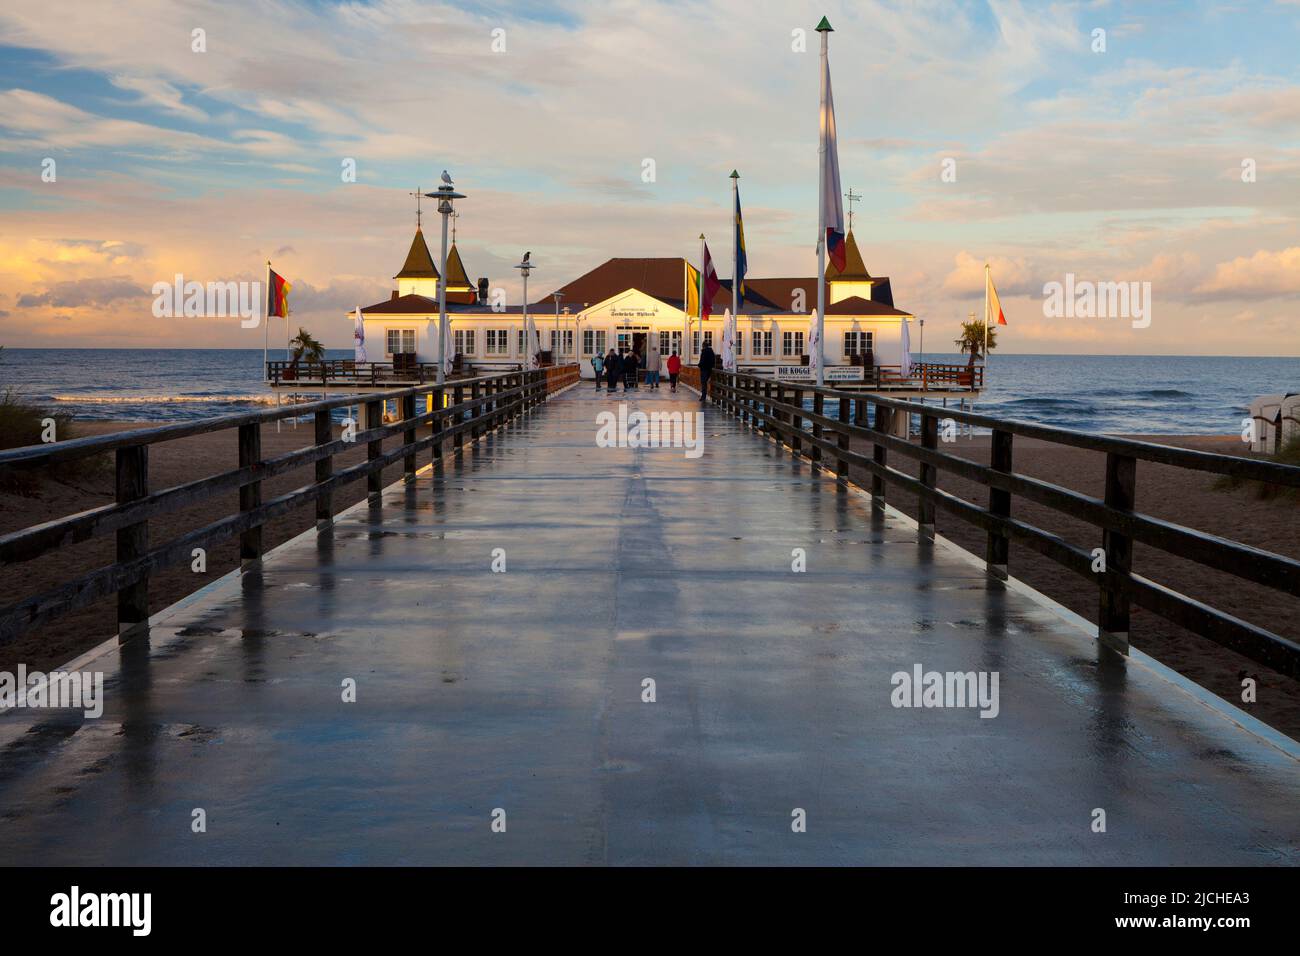 The Historic Pier in Ahlbeck on the Island of Usedom, Baltic Coast, Mecklenburg-Vorpommern, Germany Stock Photo